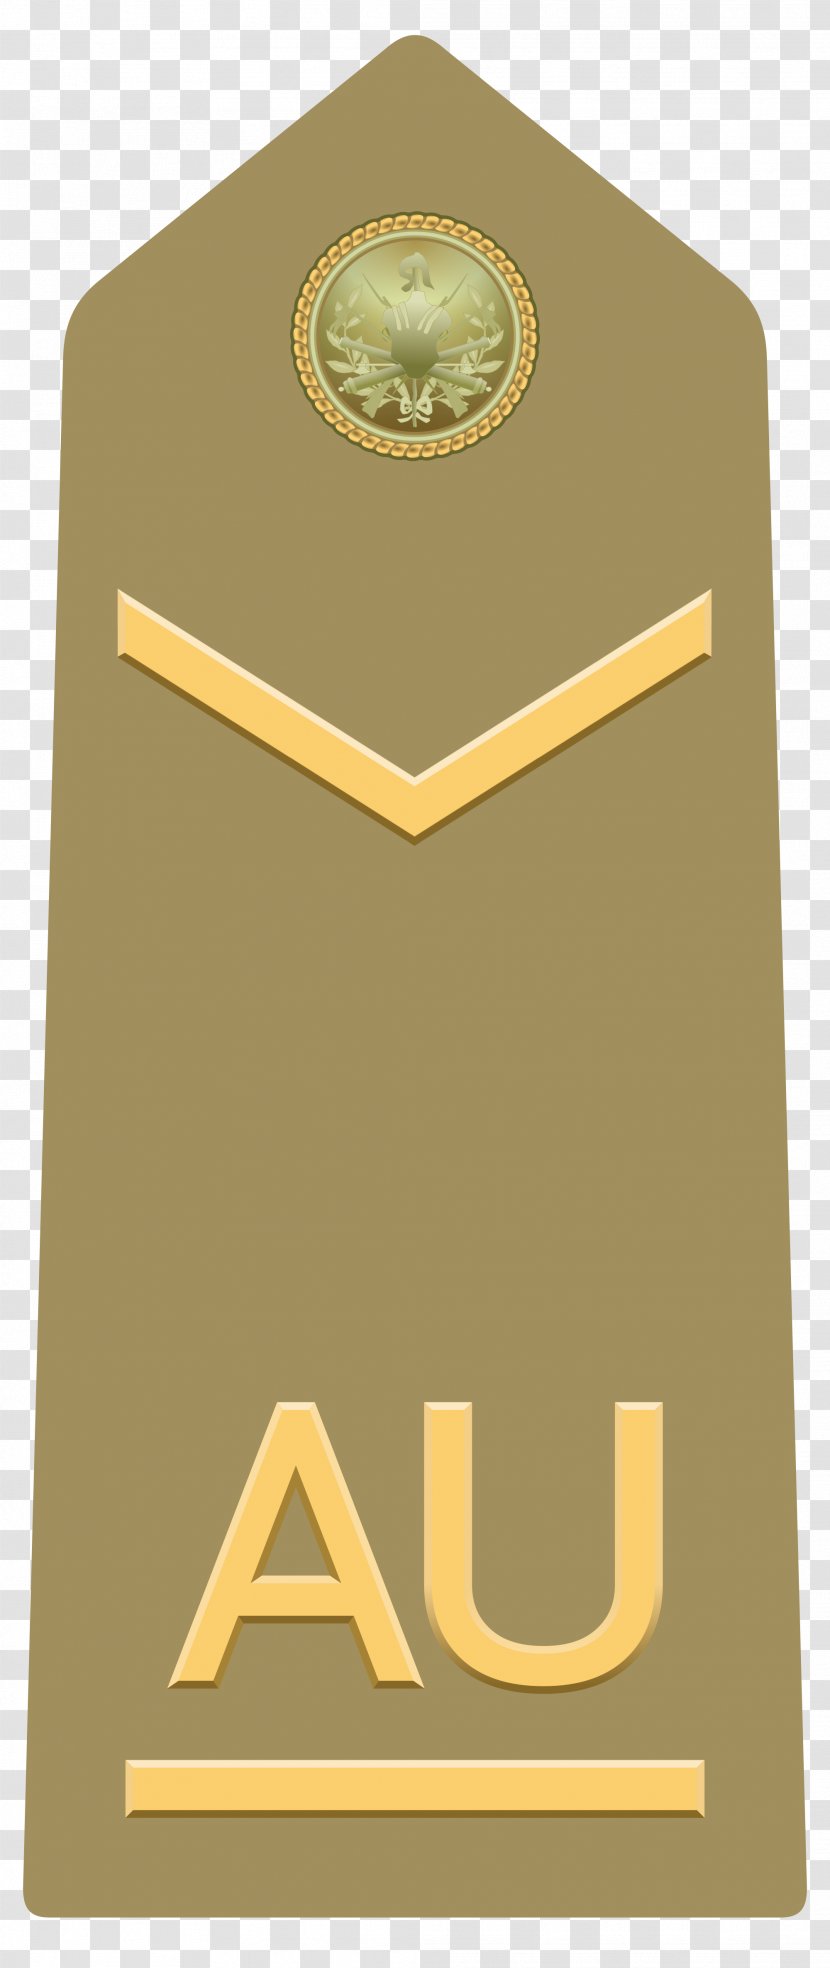 Officer Cadet Army Caporal Maggiore Capo Scelto Military Rank Italian - Captain - Tanks In The Transparent PNG